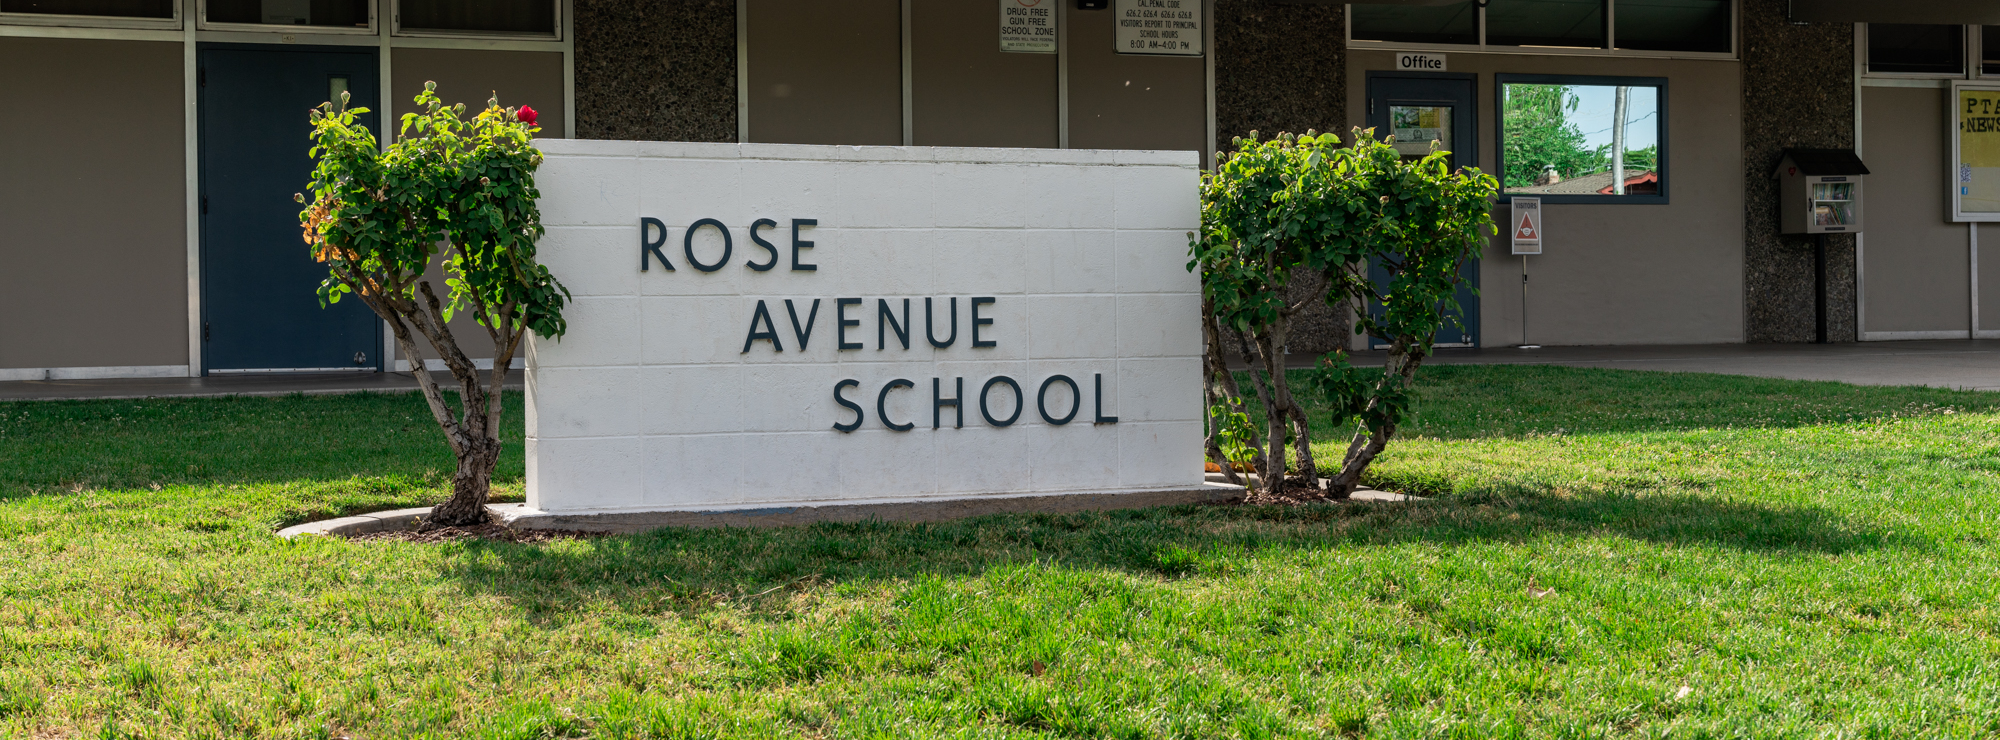 Rose Avenue School sign in front of the school